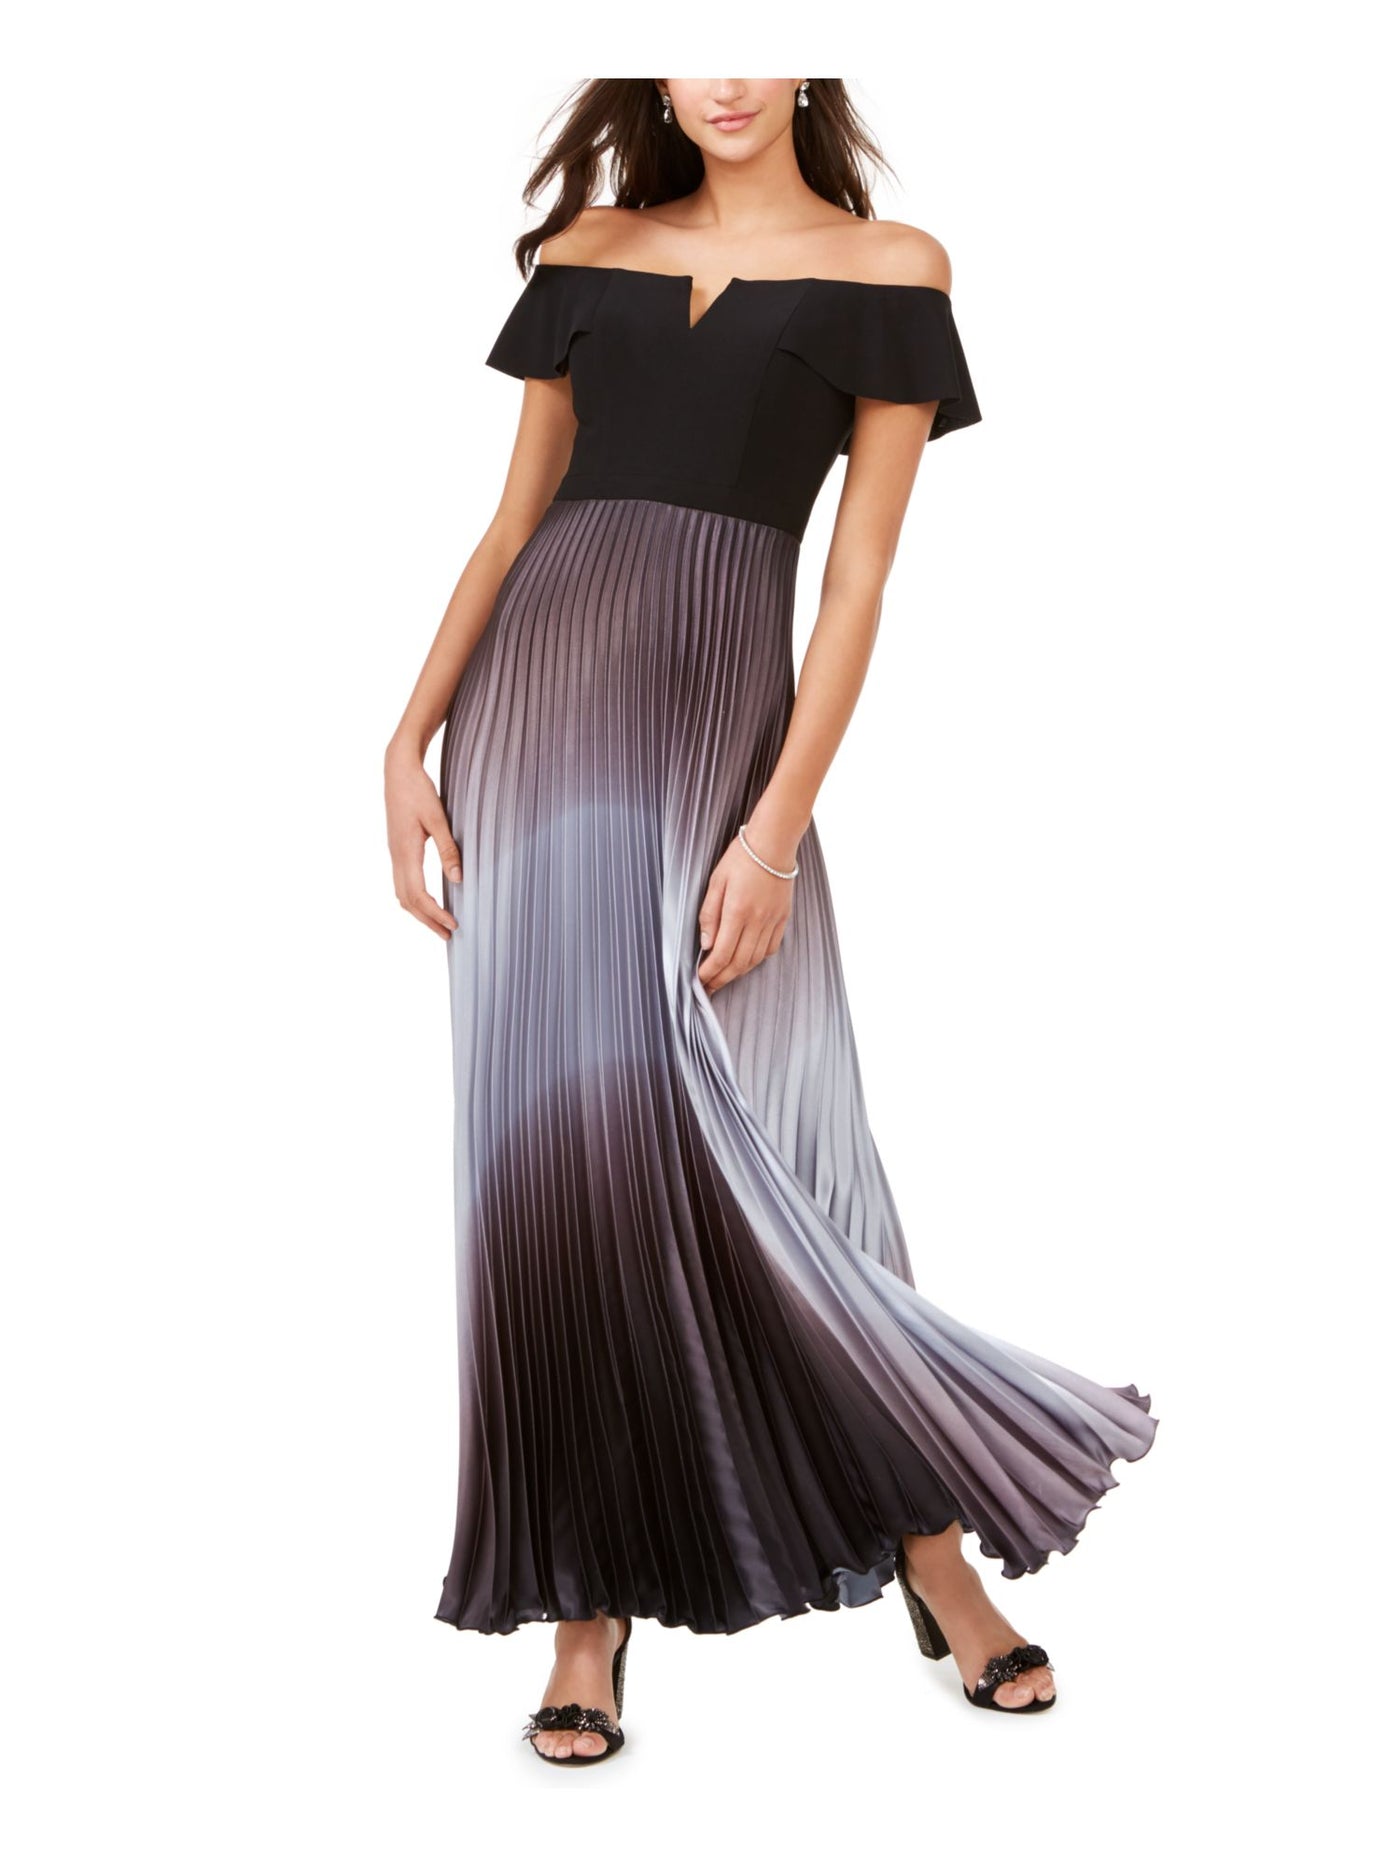 BETSY & ADAM Womens Black Ombre Off Shoulder Maxi Evening Pleated Dress 2